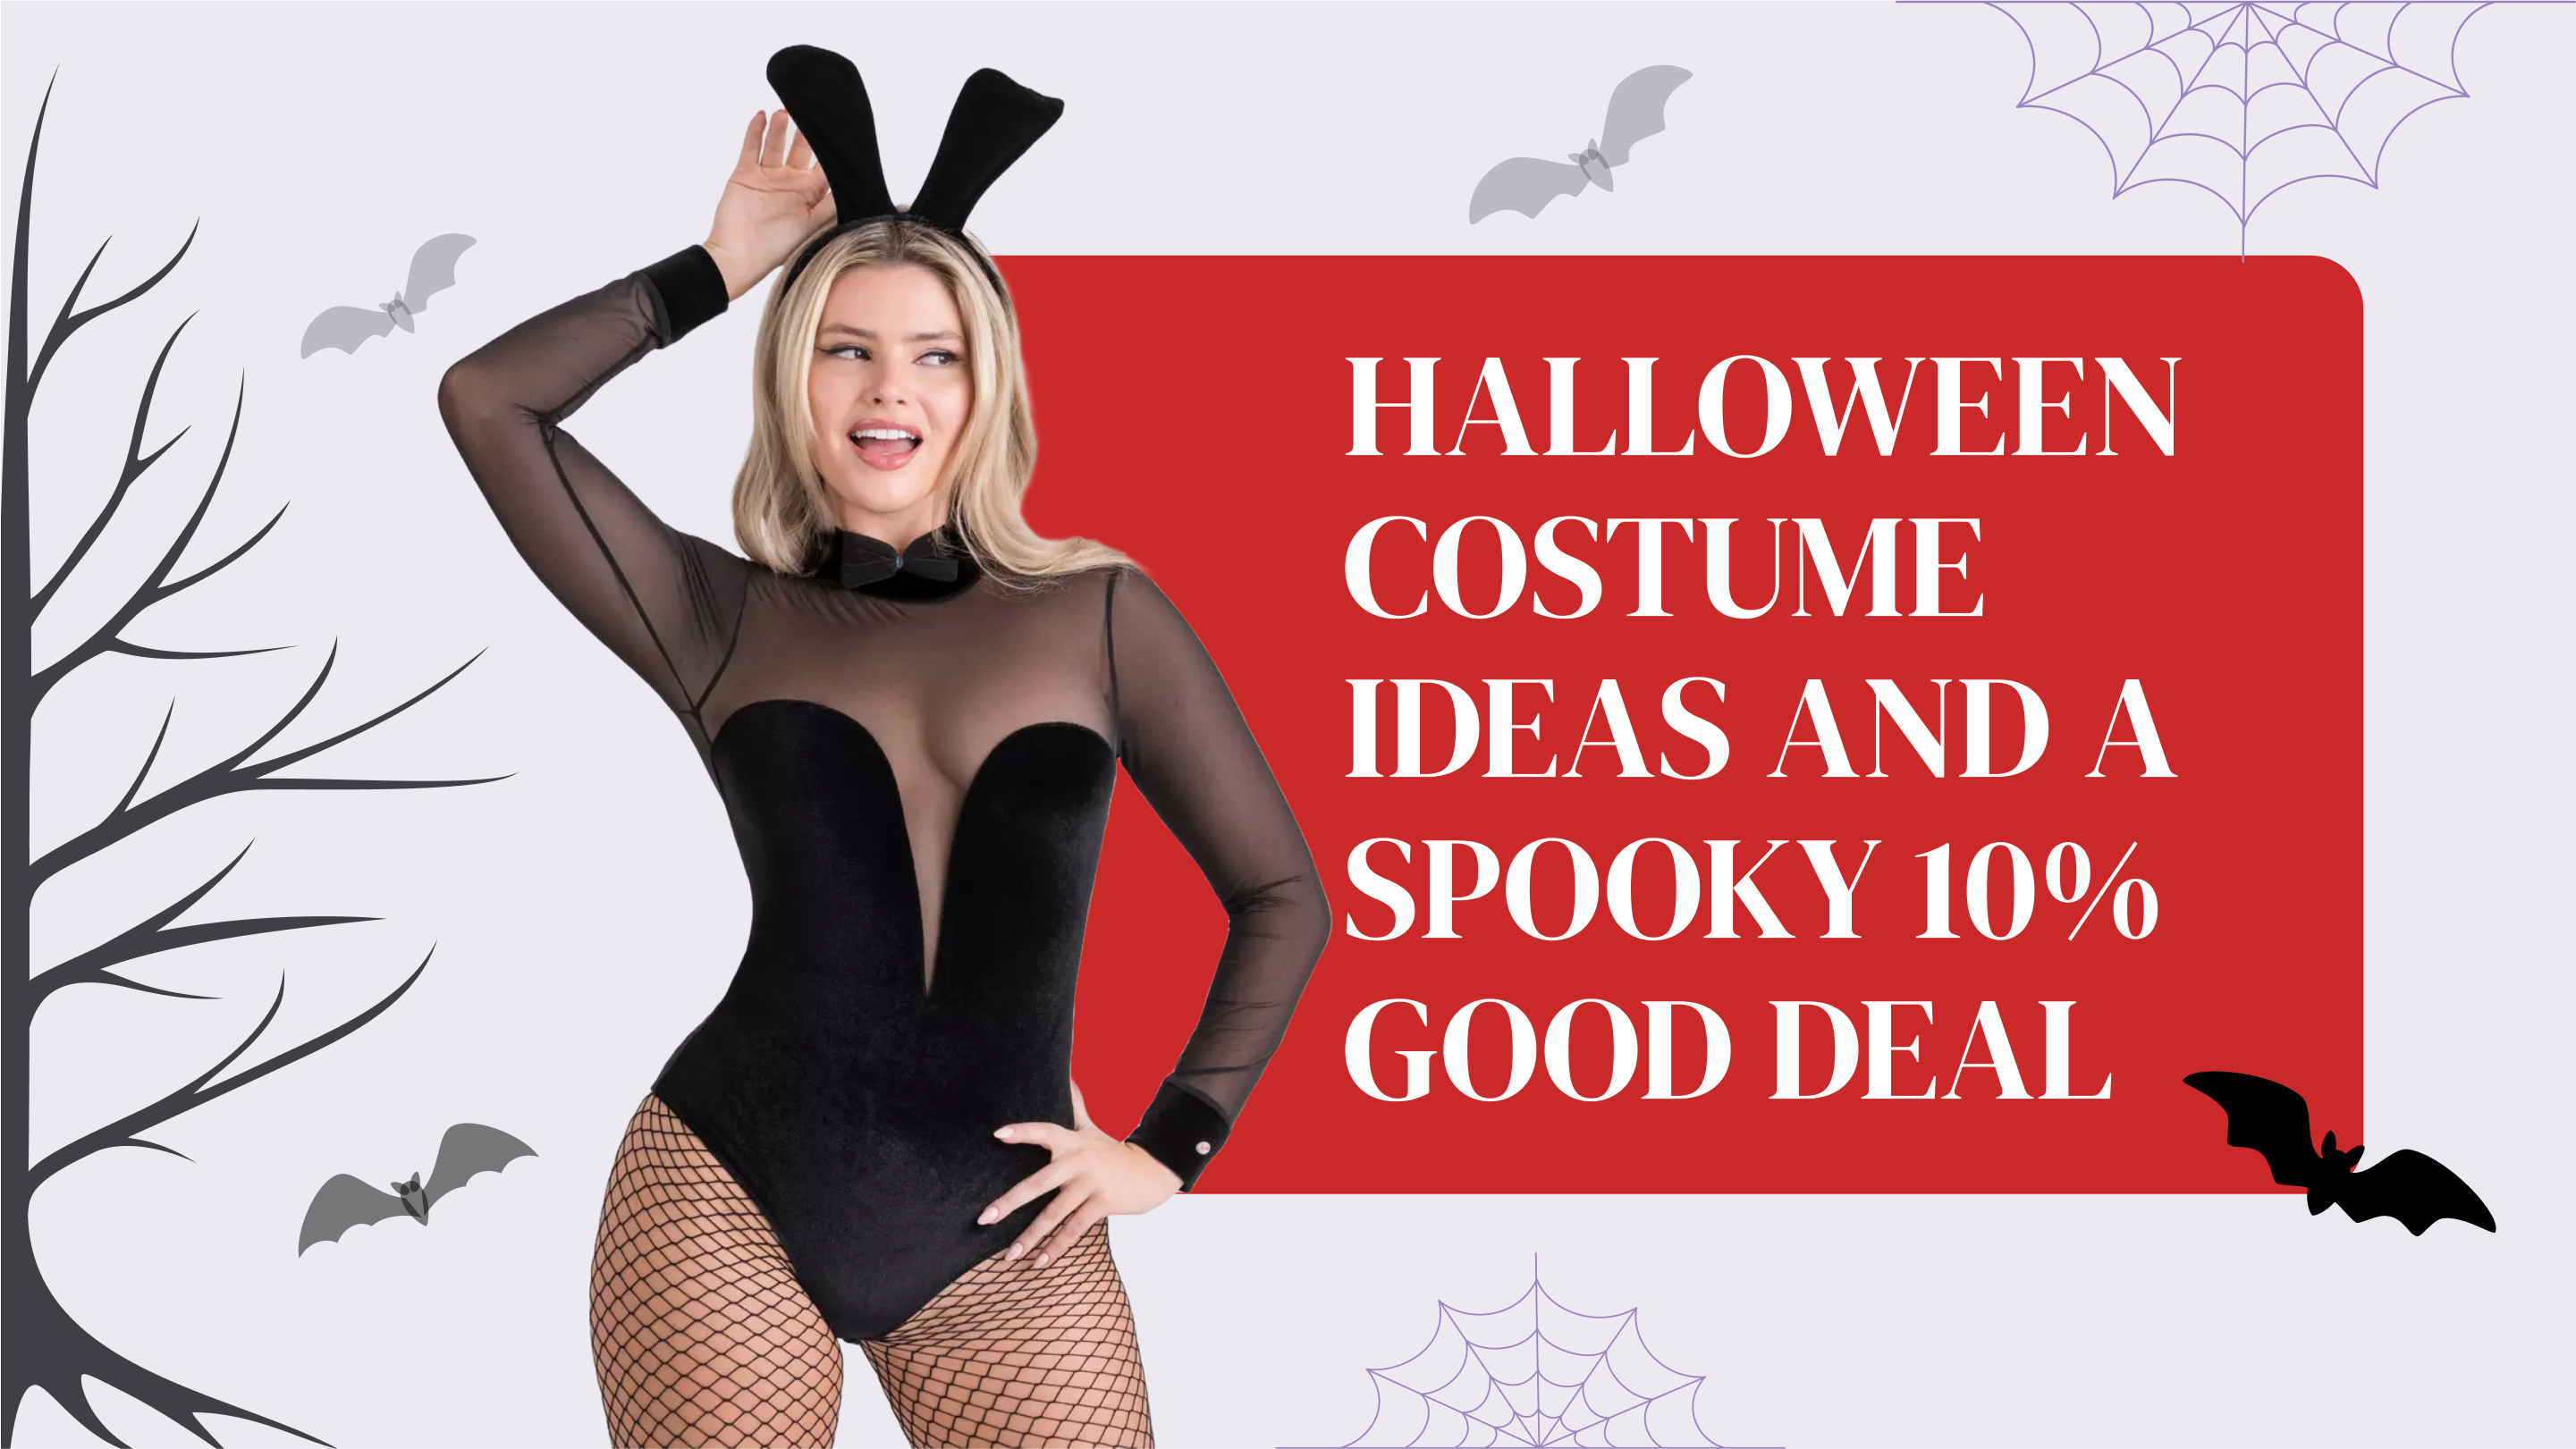 Halloween Costume Ideas and a Spooky 10% Good Deal